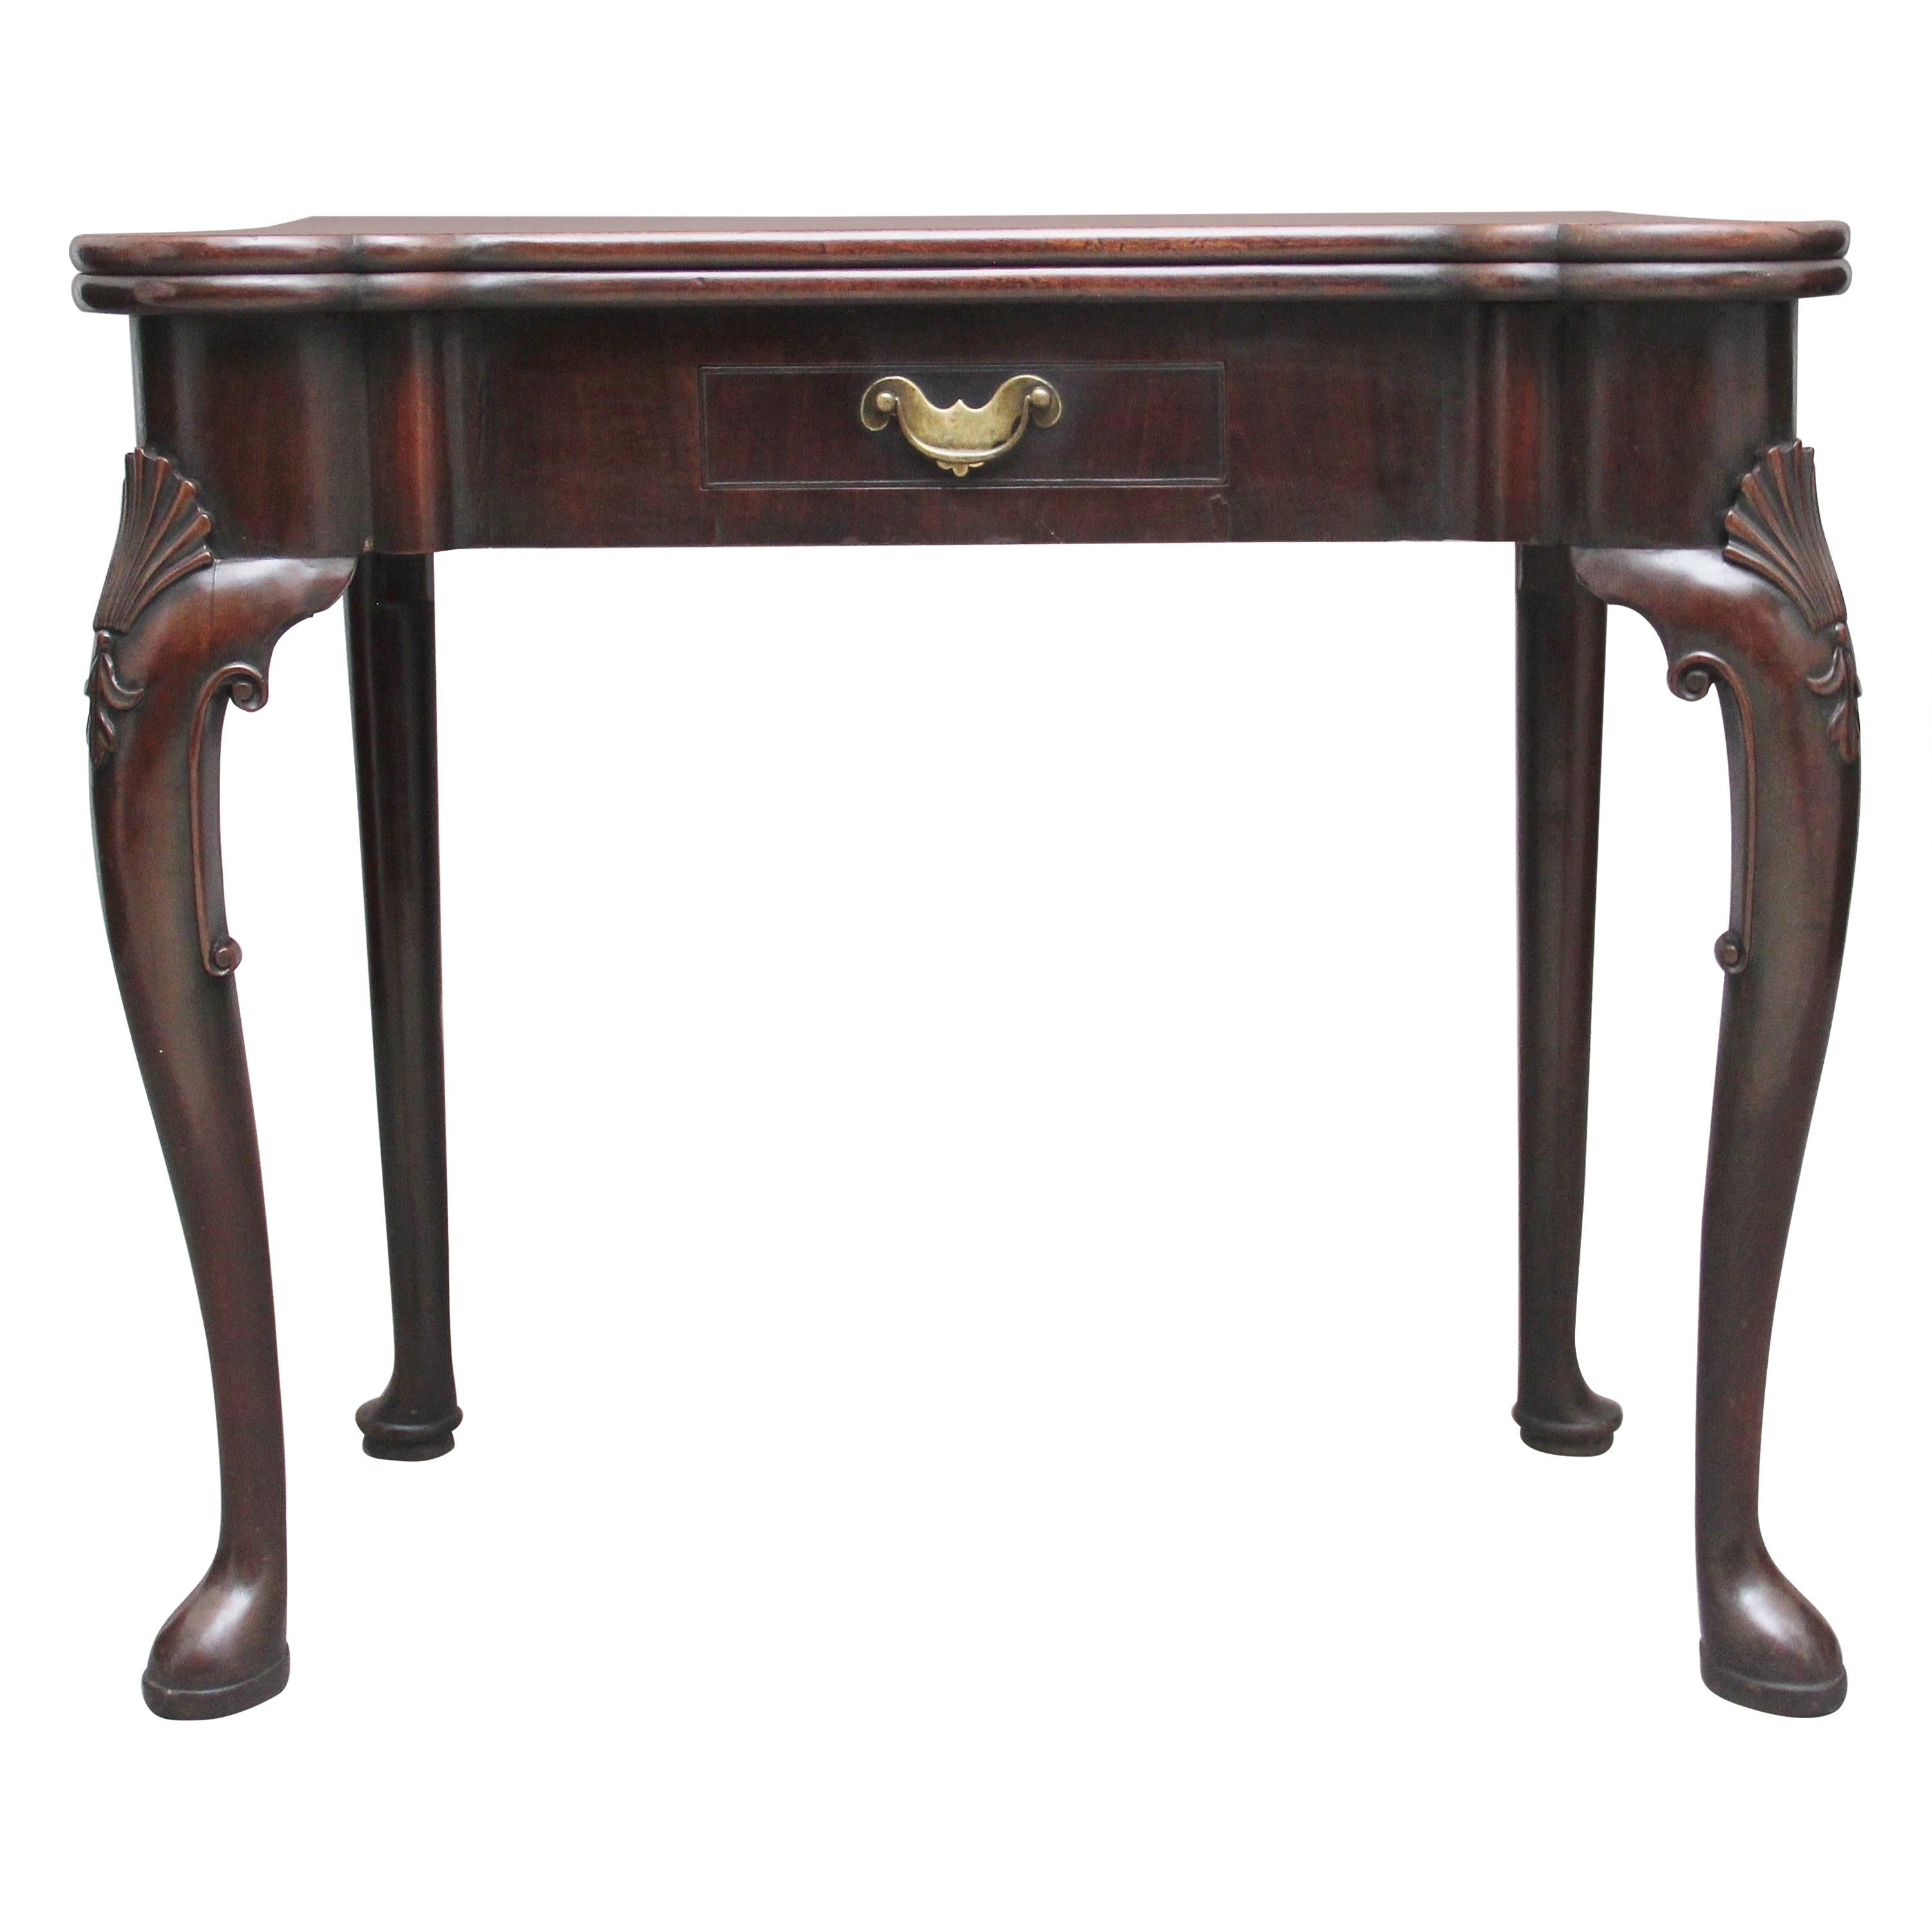 Superb Quality Early 18th Century Mahogany Games Table For Sale